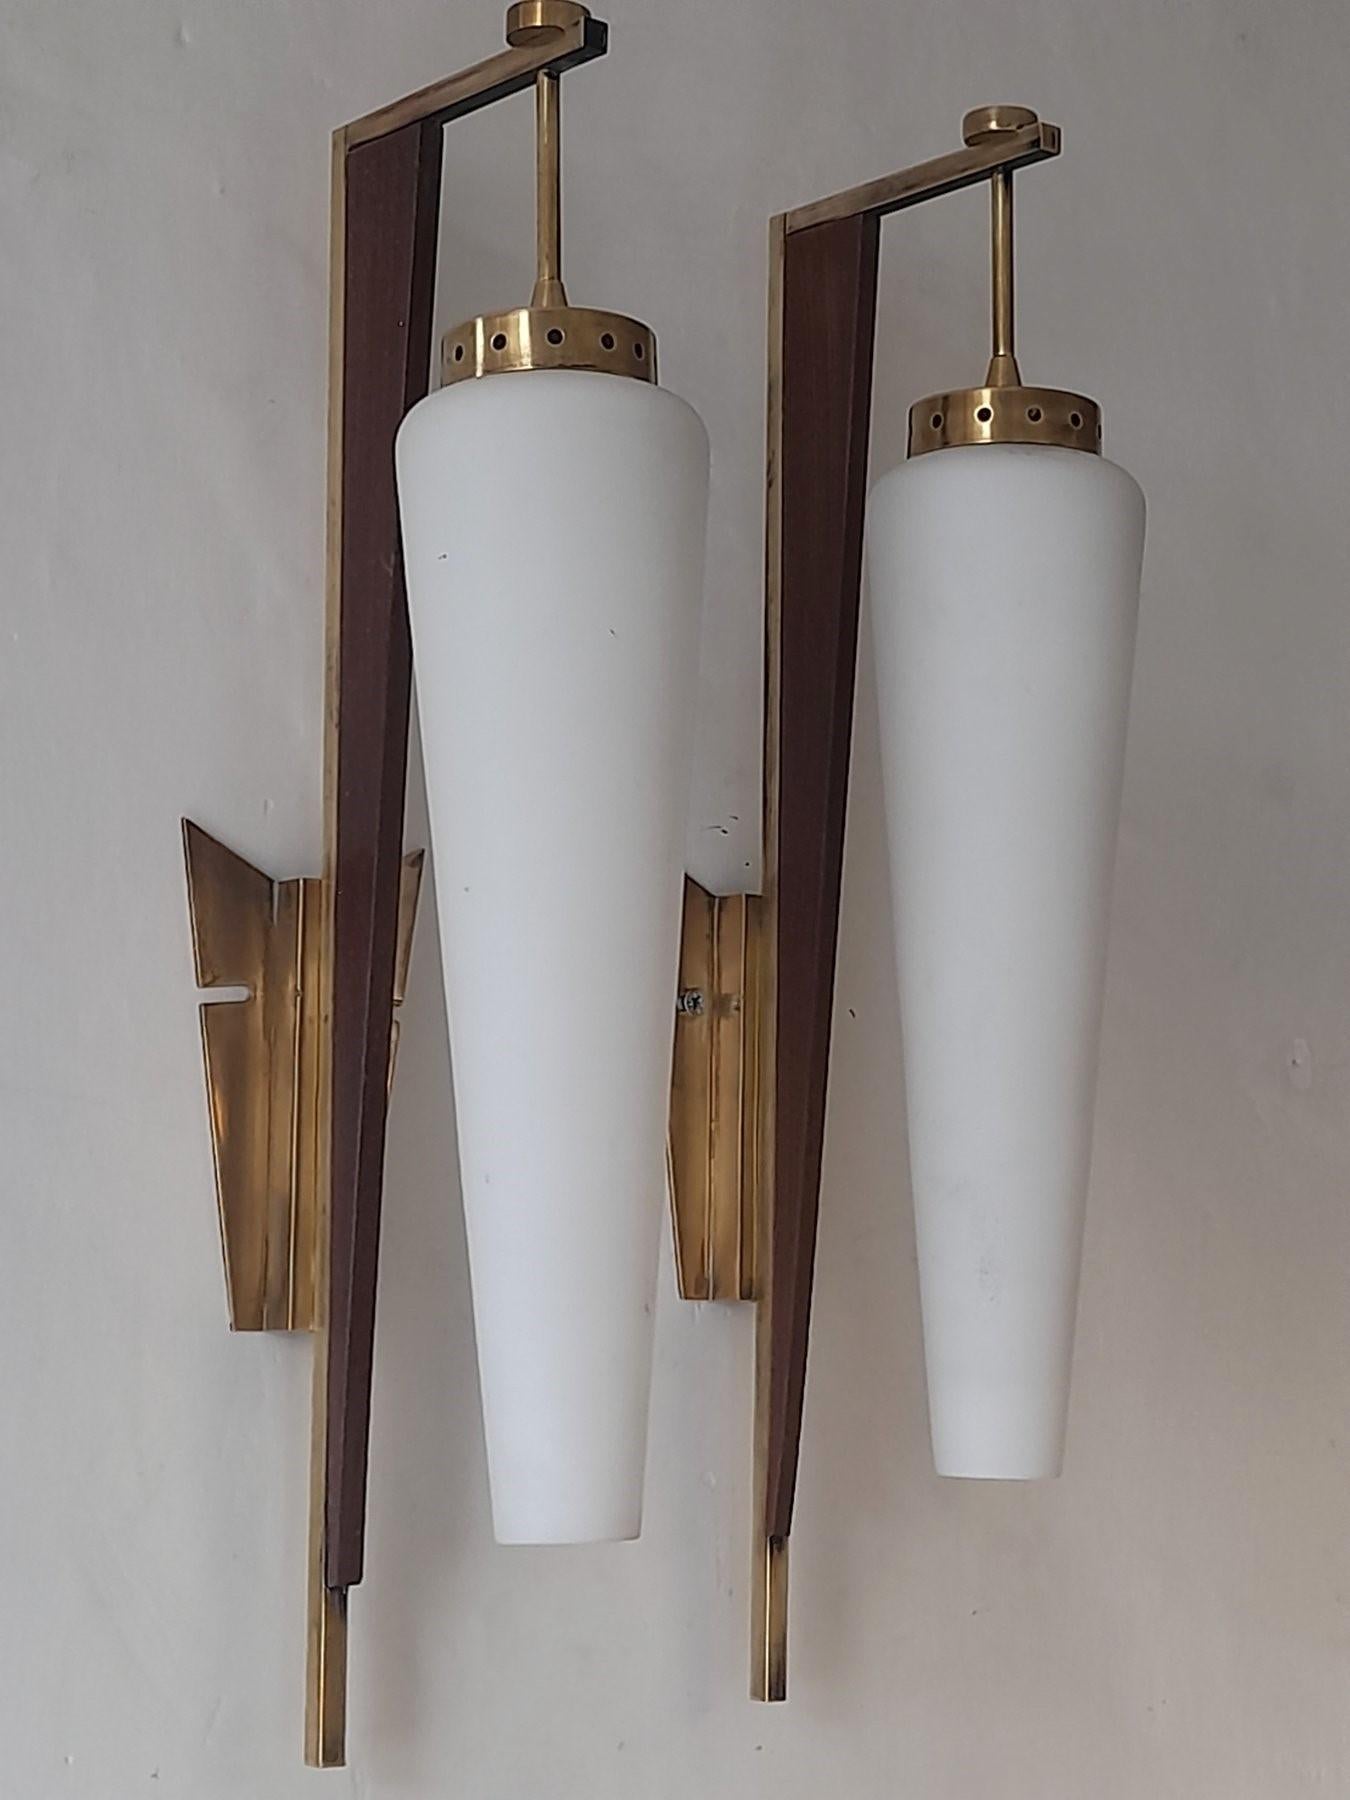 Three Stilnovo Sconces Wall Lights Brass Satin Glass Wood Accents, Italy, 1950s For Sale 7